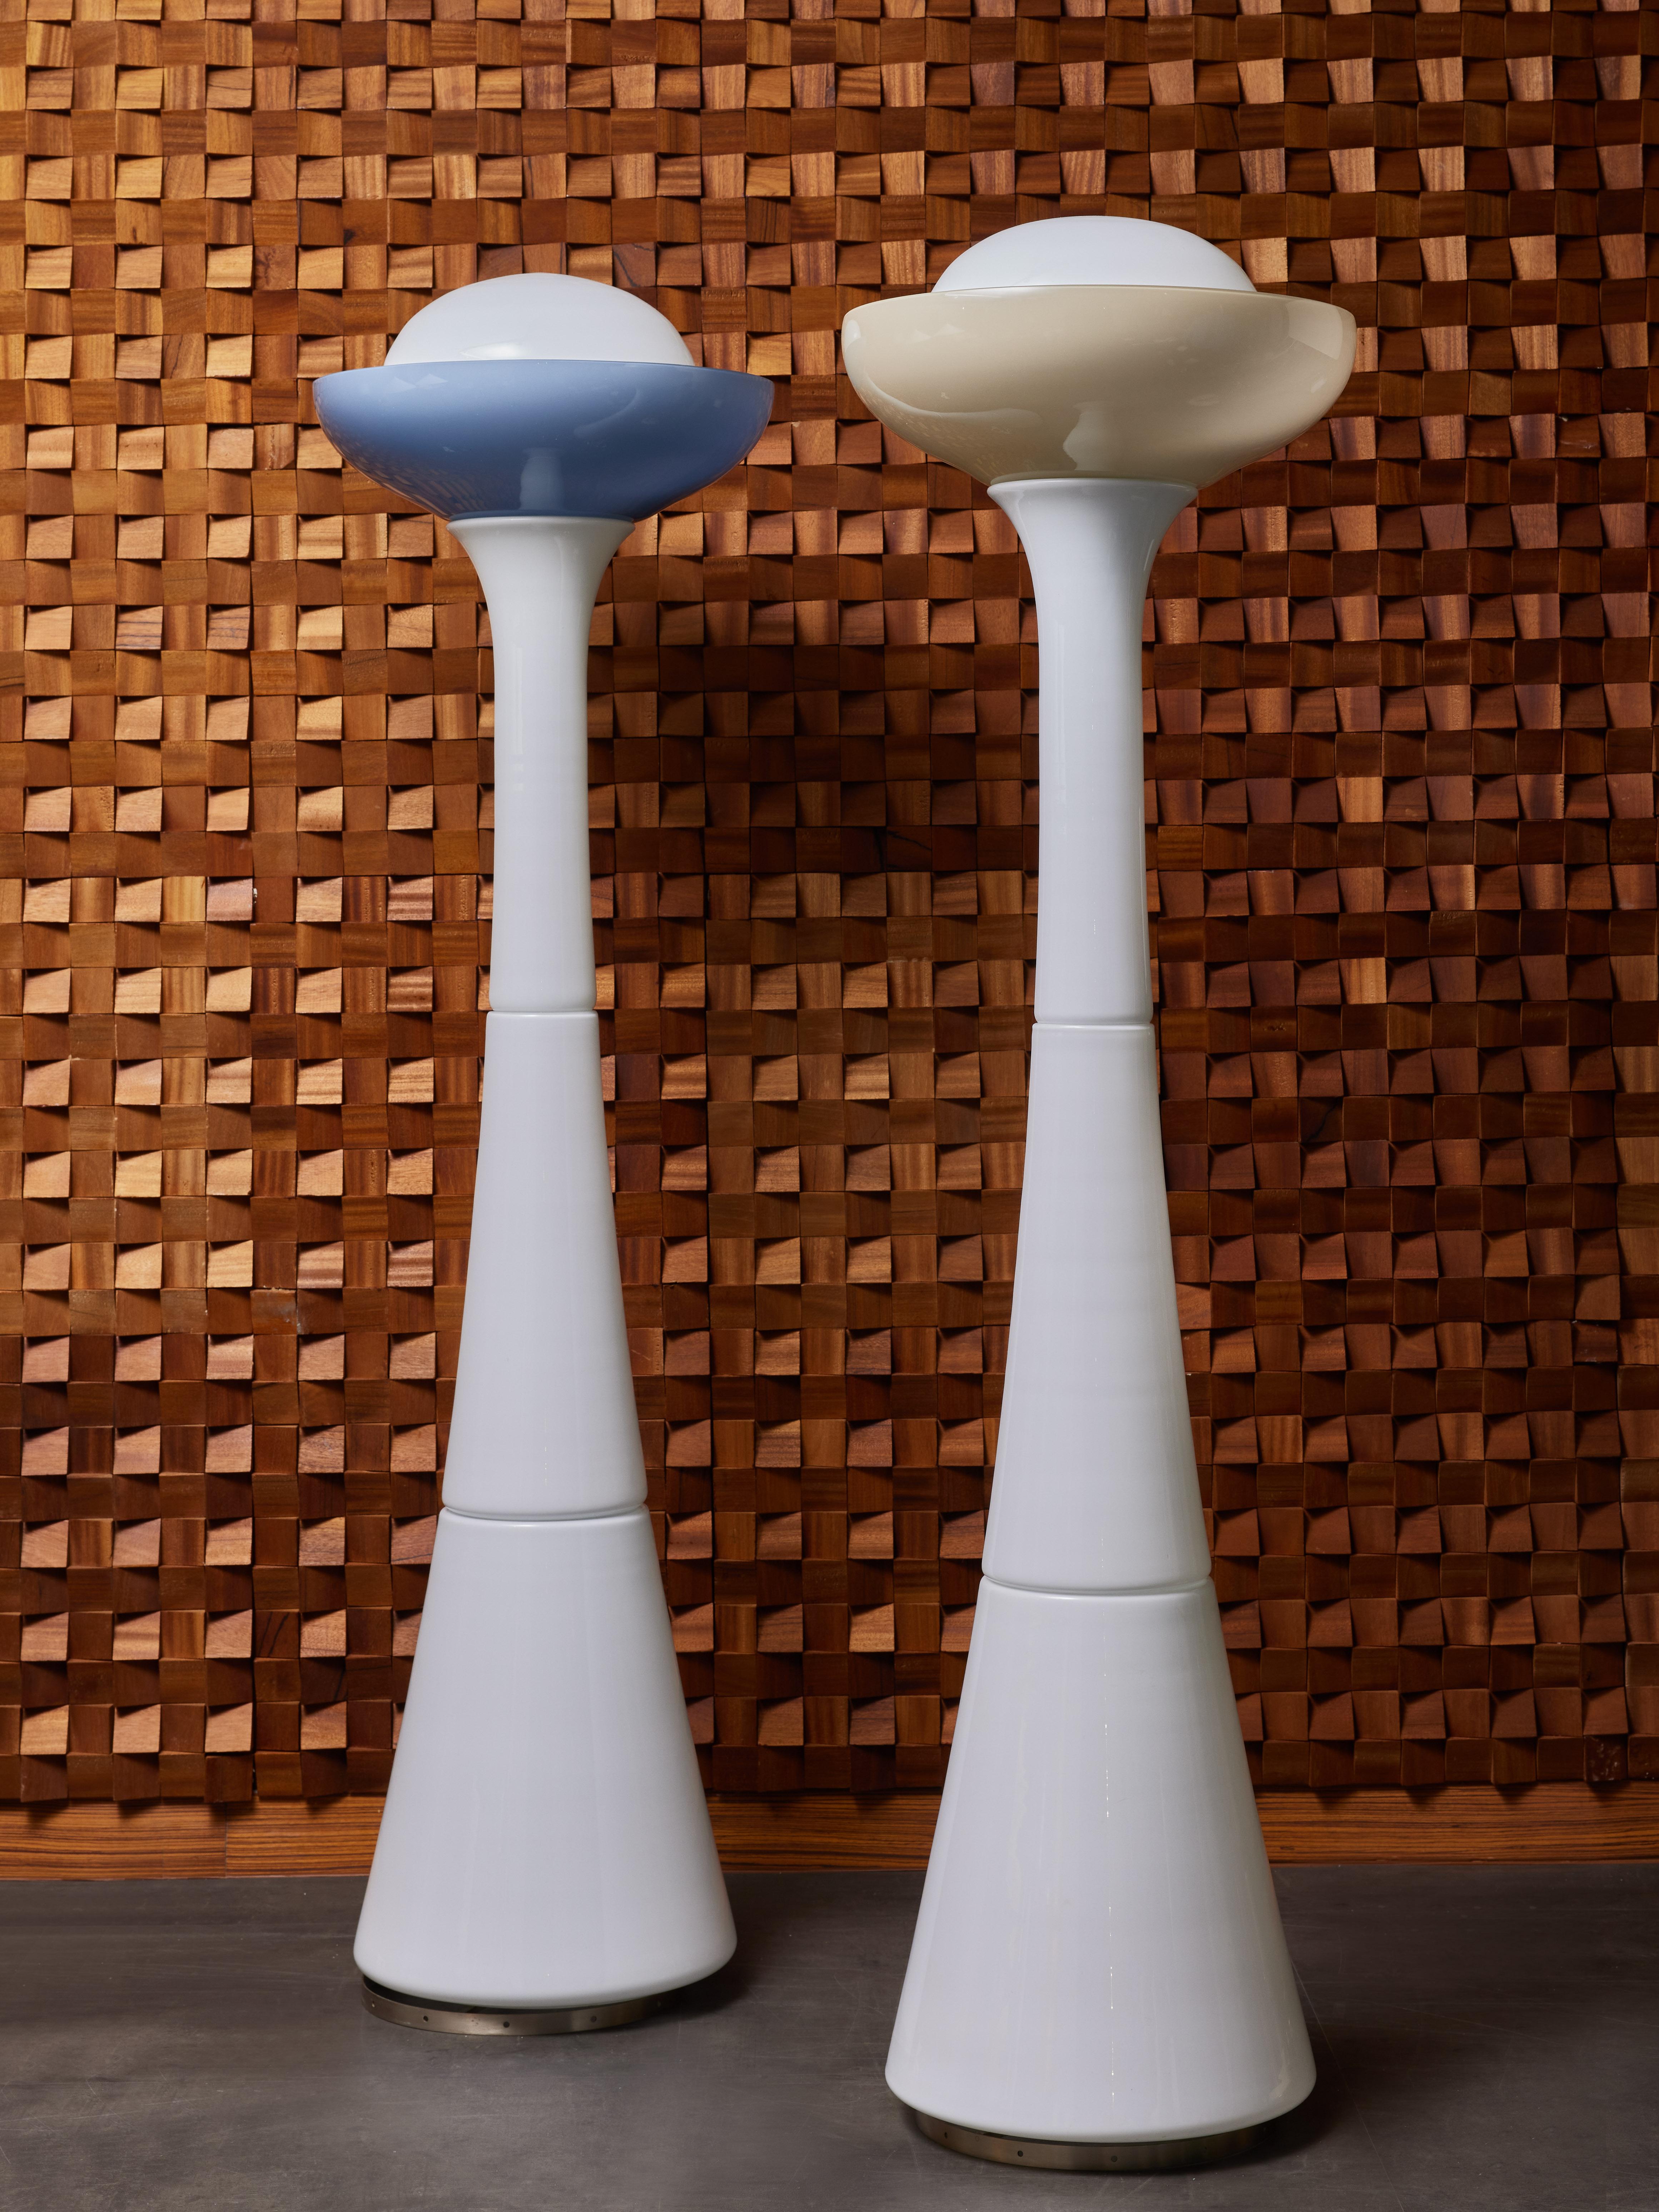 Beautiful floor lamps designed by Carlo Nason for Selenova, they are made of a steel inner structure, on which are stacked several opaline glass, topped with a blue or brown larger bowl.

Selenova
Selenova is famous Italian luminaire manufacturer